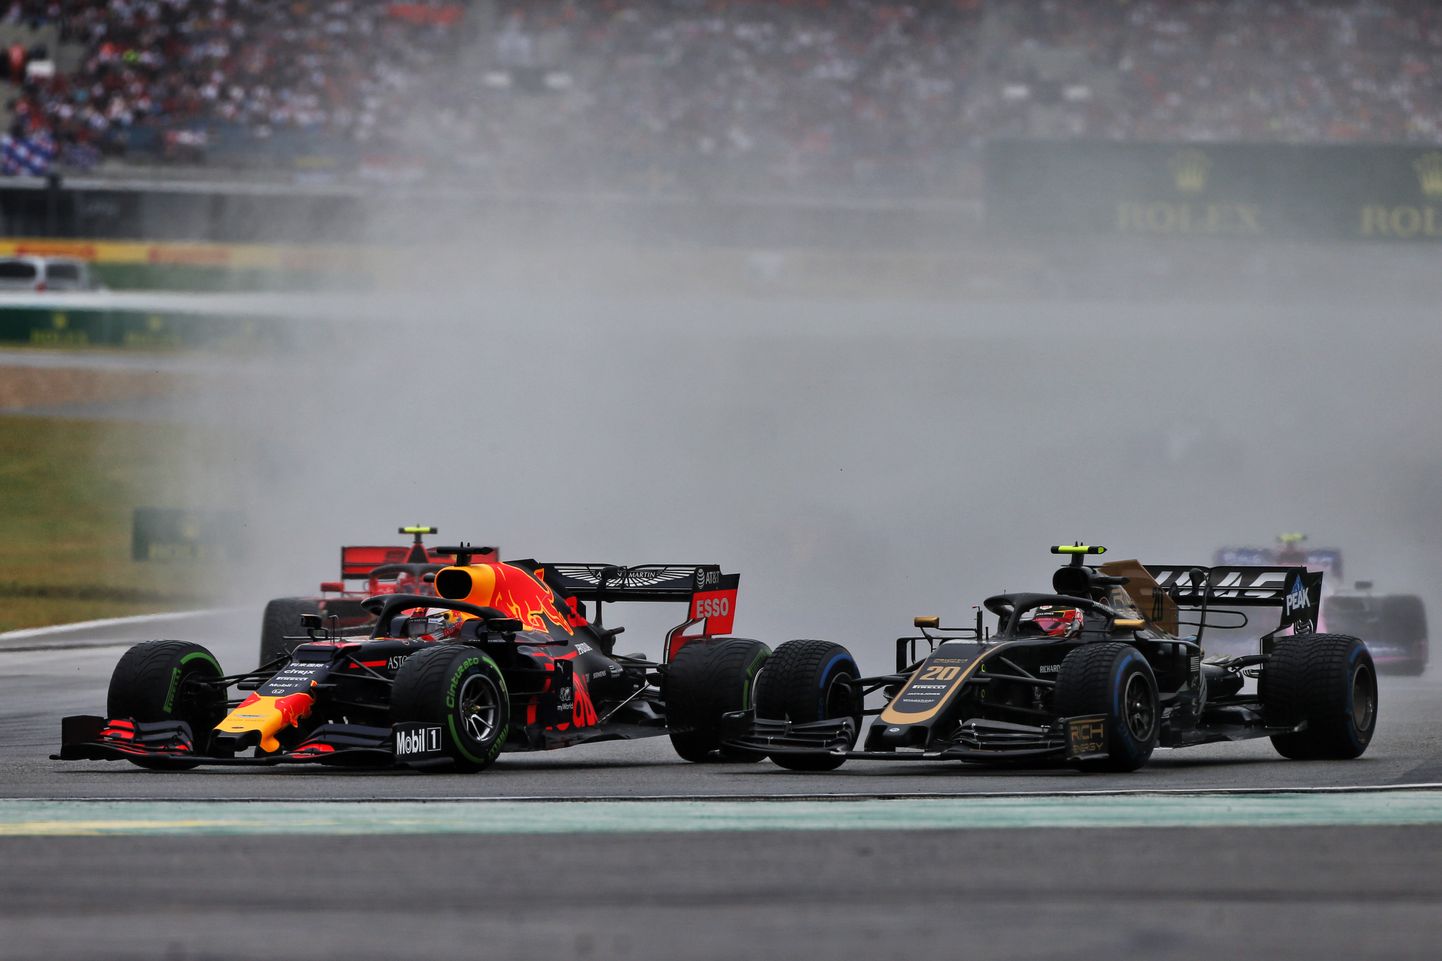 (L to R): Max Verstappen (NLD) Red Bull Racing RB15 and Kevin Magnussen (DEN) Haas VF-19 battle for position.
German Grand Prix, Sunday 28th July 2019. Hockenheim, Germany.